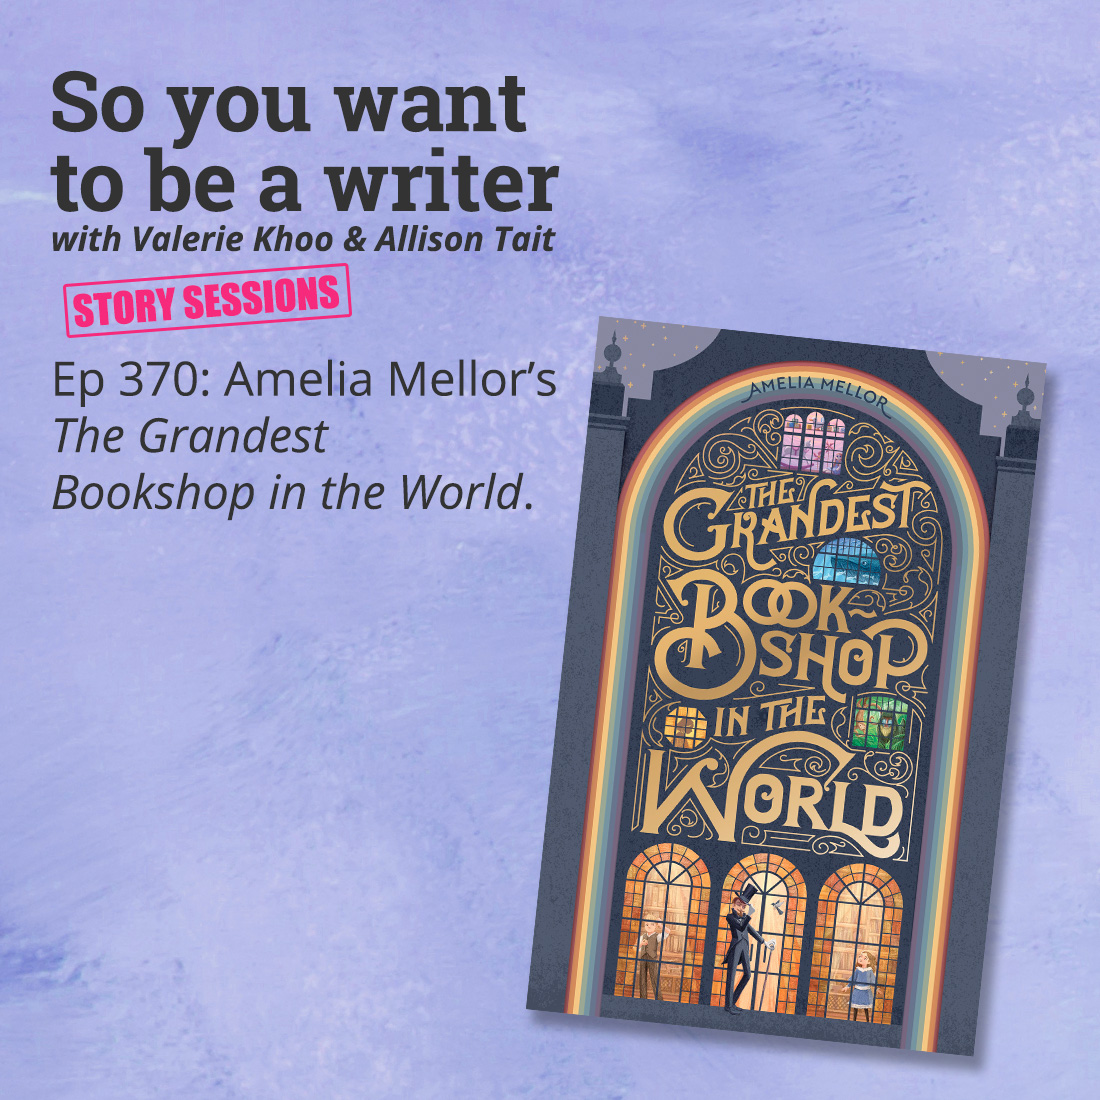 WRITER 370 Amelia Mellor's 'The Grandest Bookshop in the World' [Story Sessions series]